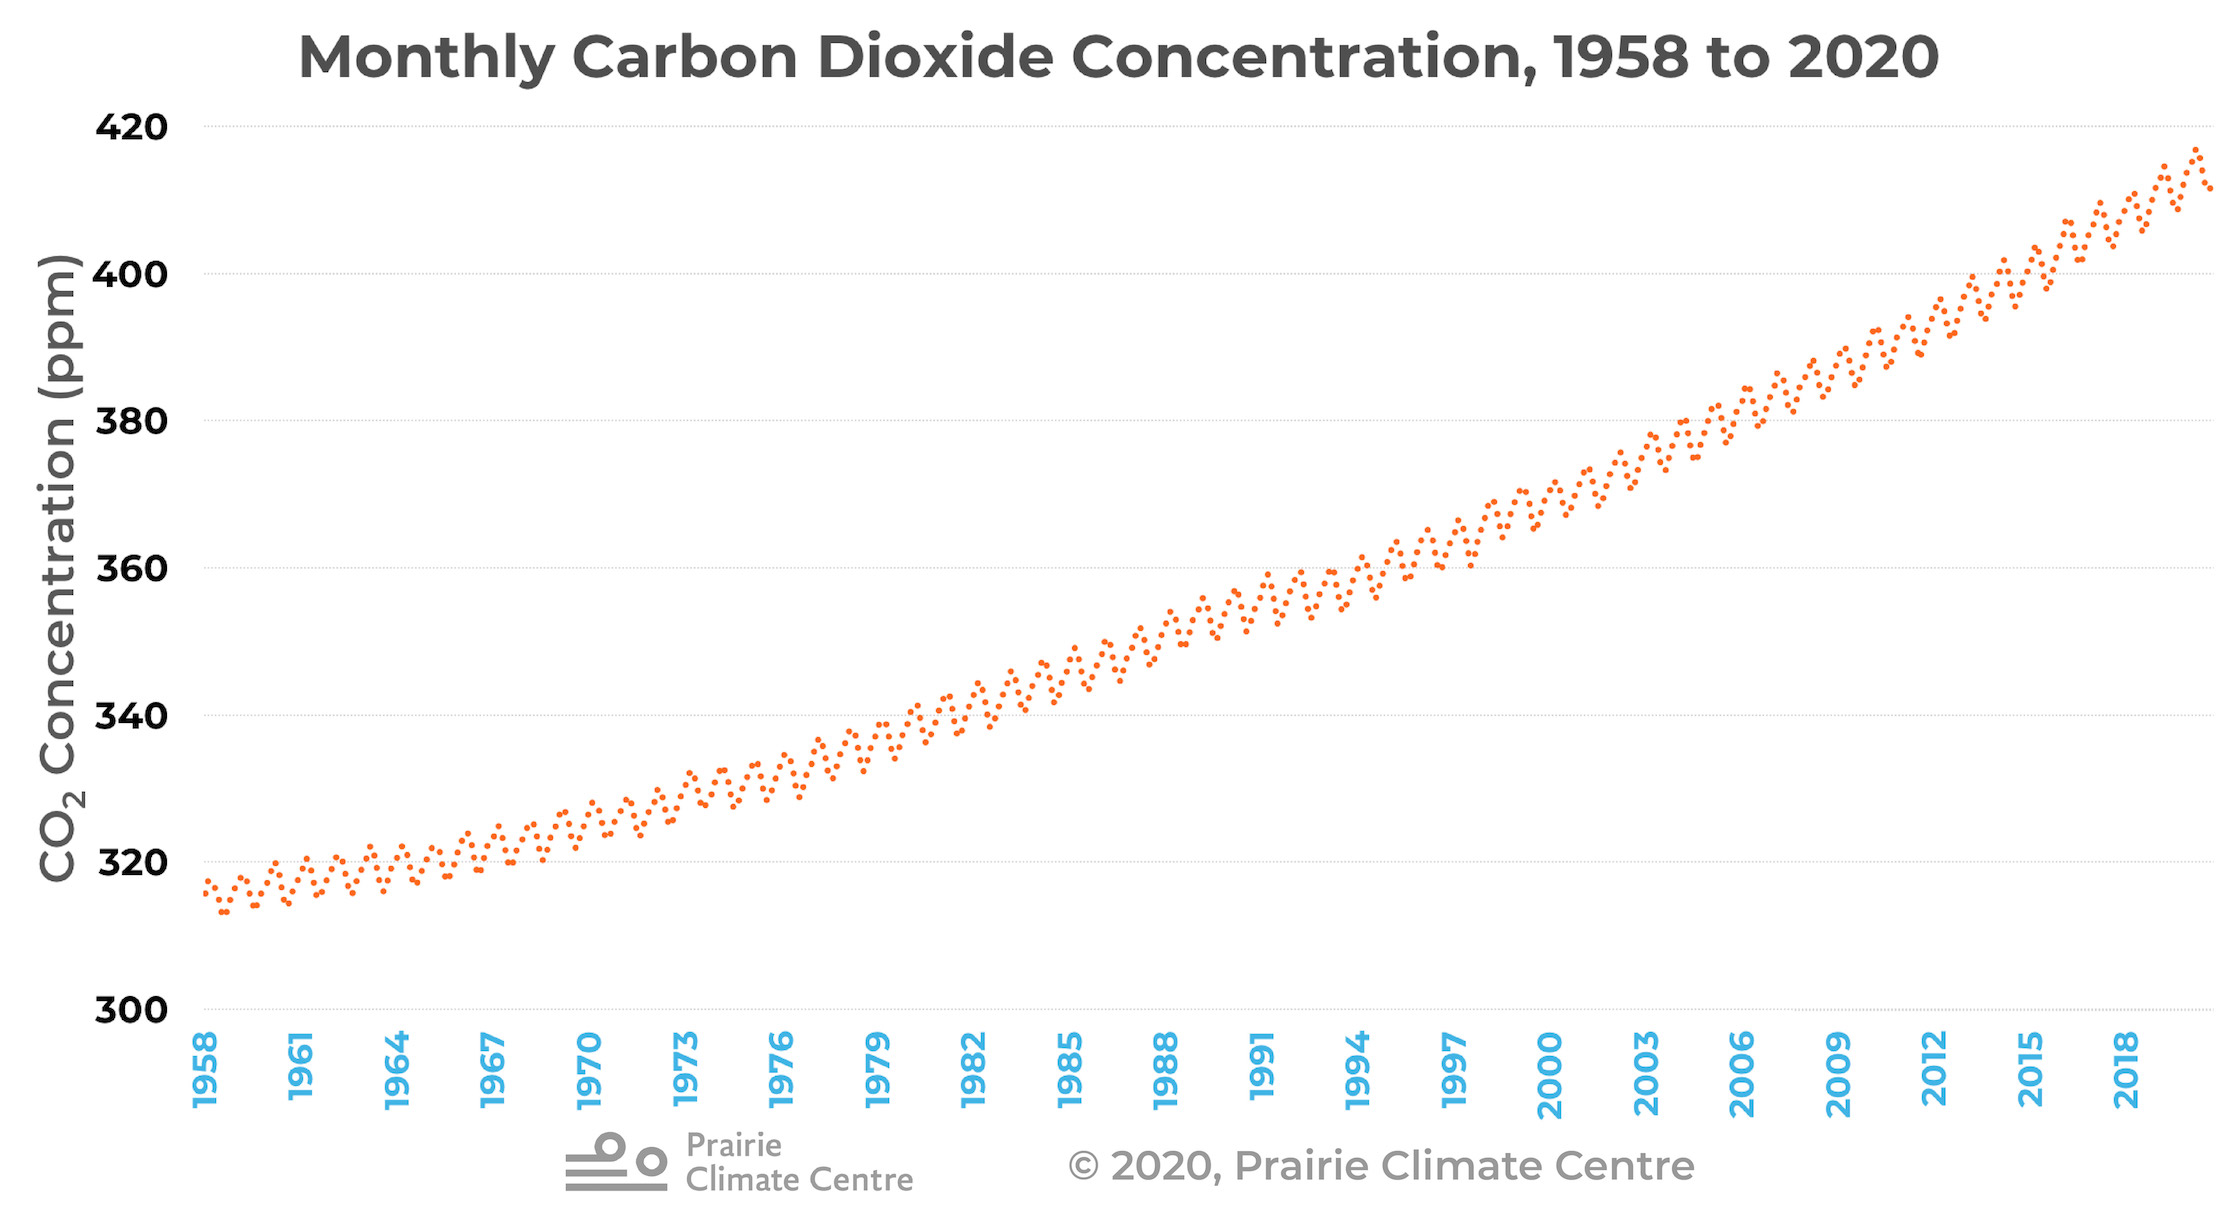 Monthly CO2 Concentration, 1958-2020